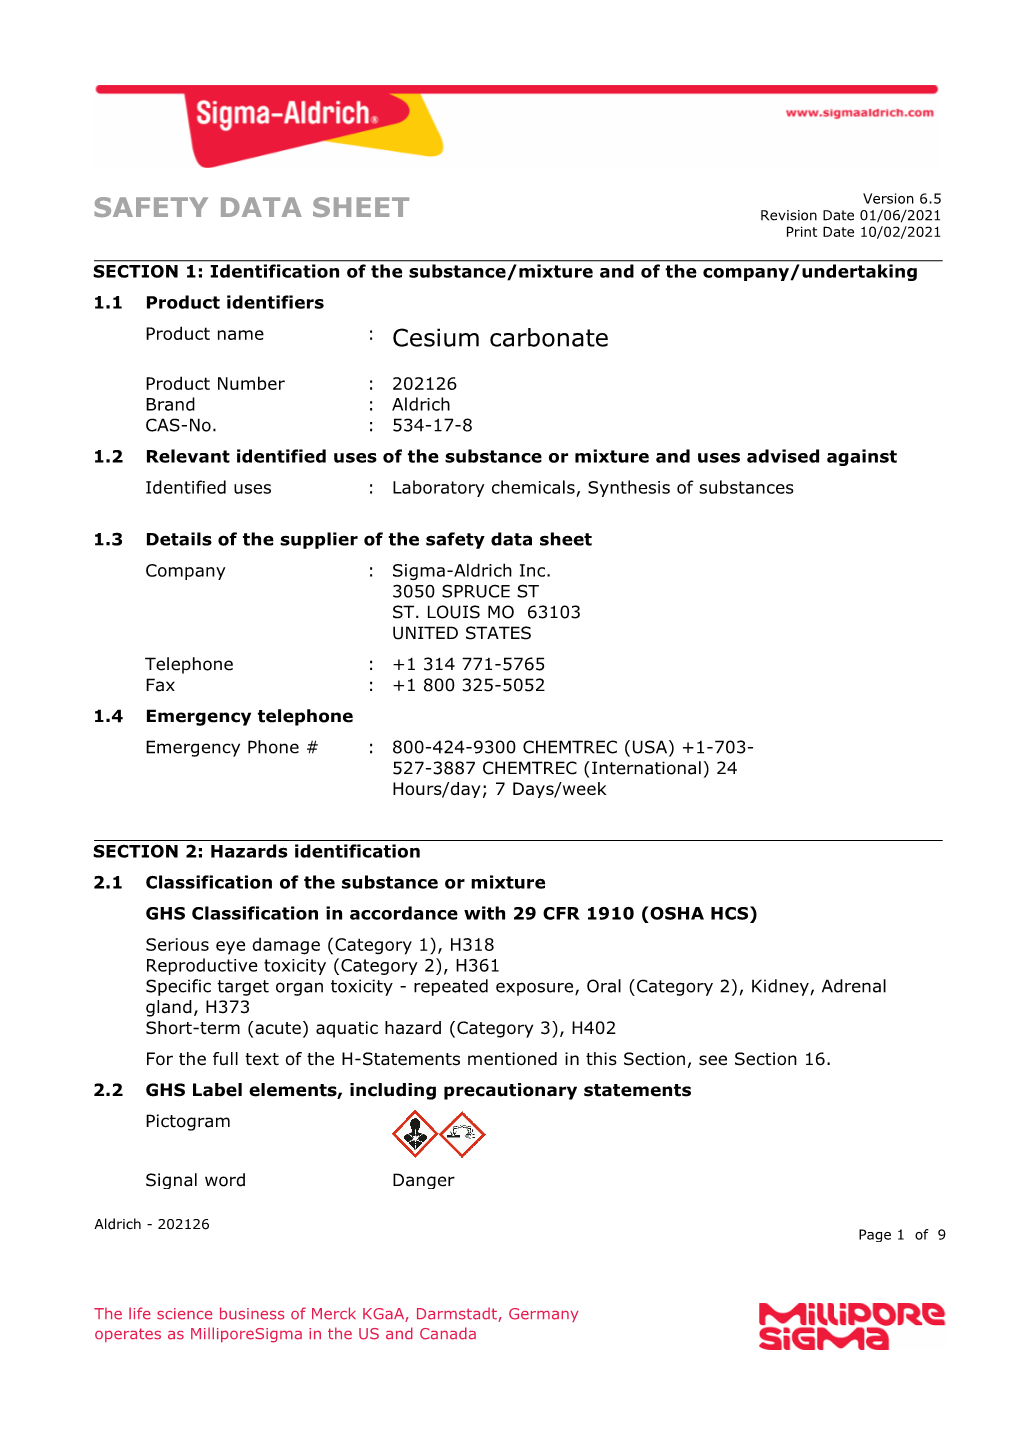 SAFETY DATA SHEET Revision Date 01/06/2021 Print Date 10/02/2021